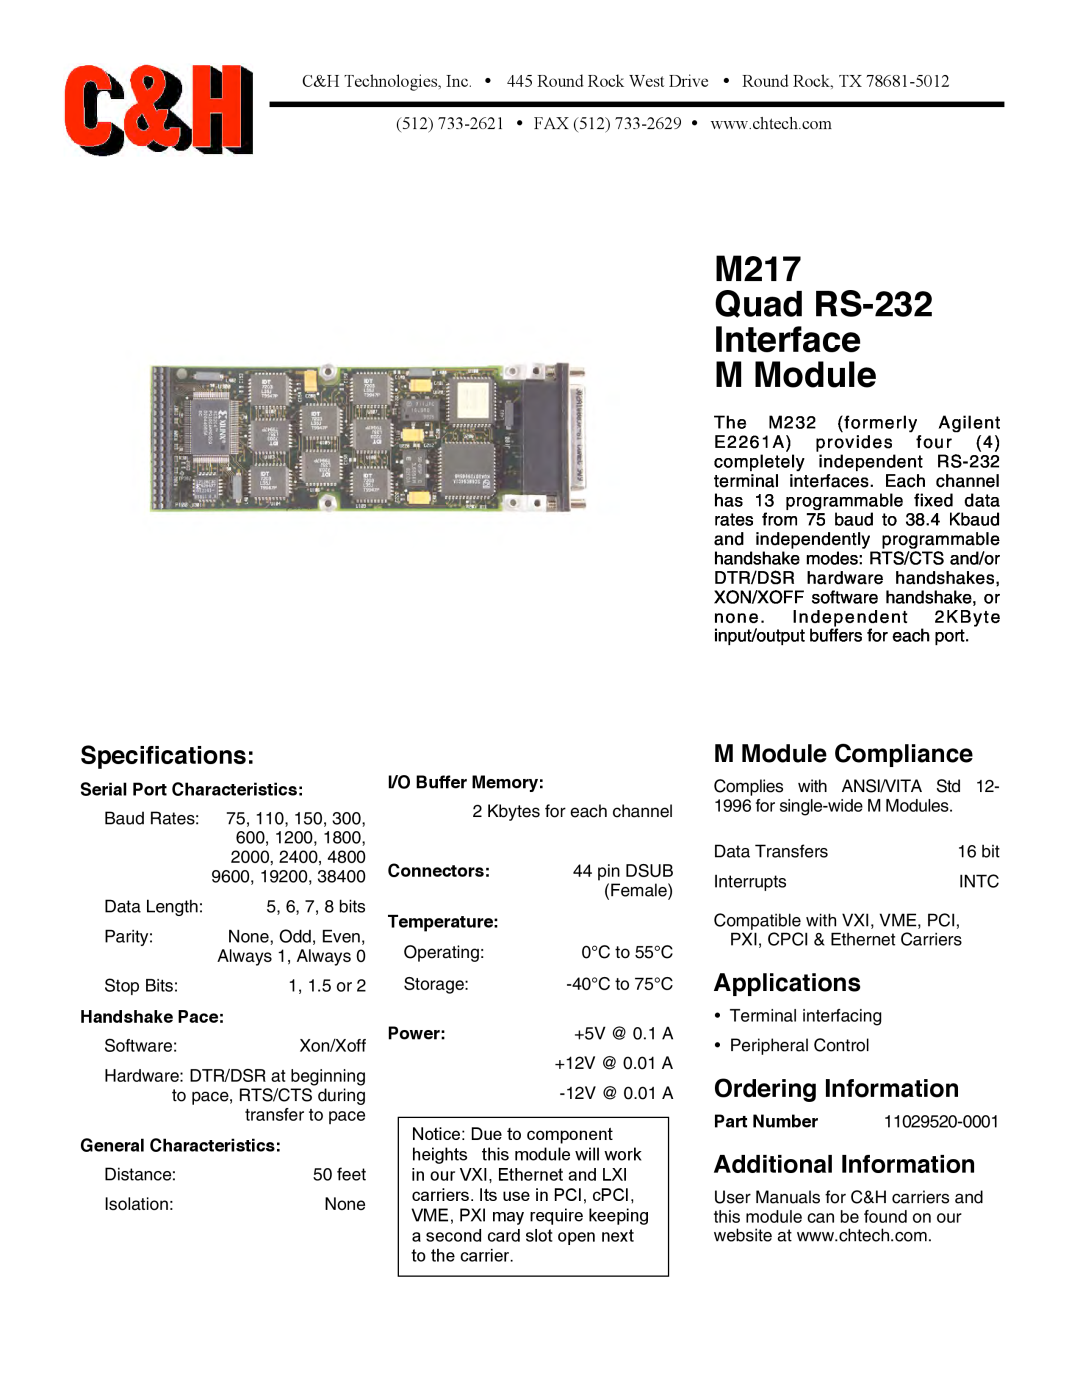 CH Tech specifications M217 Quad RS-232 Interface M Module, Specifications, M Module Compliance, Applications, Power 